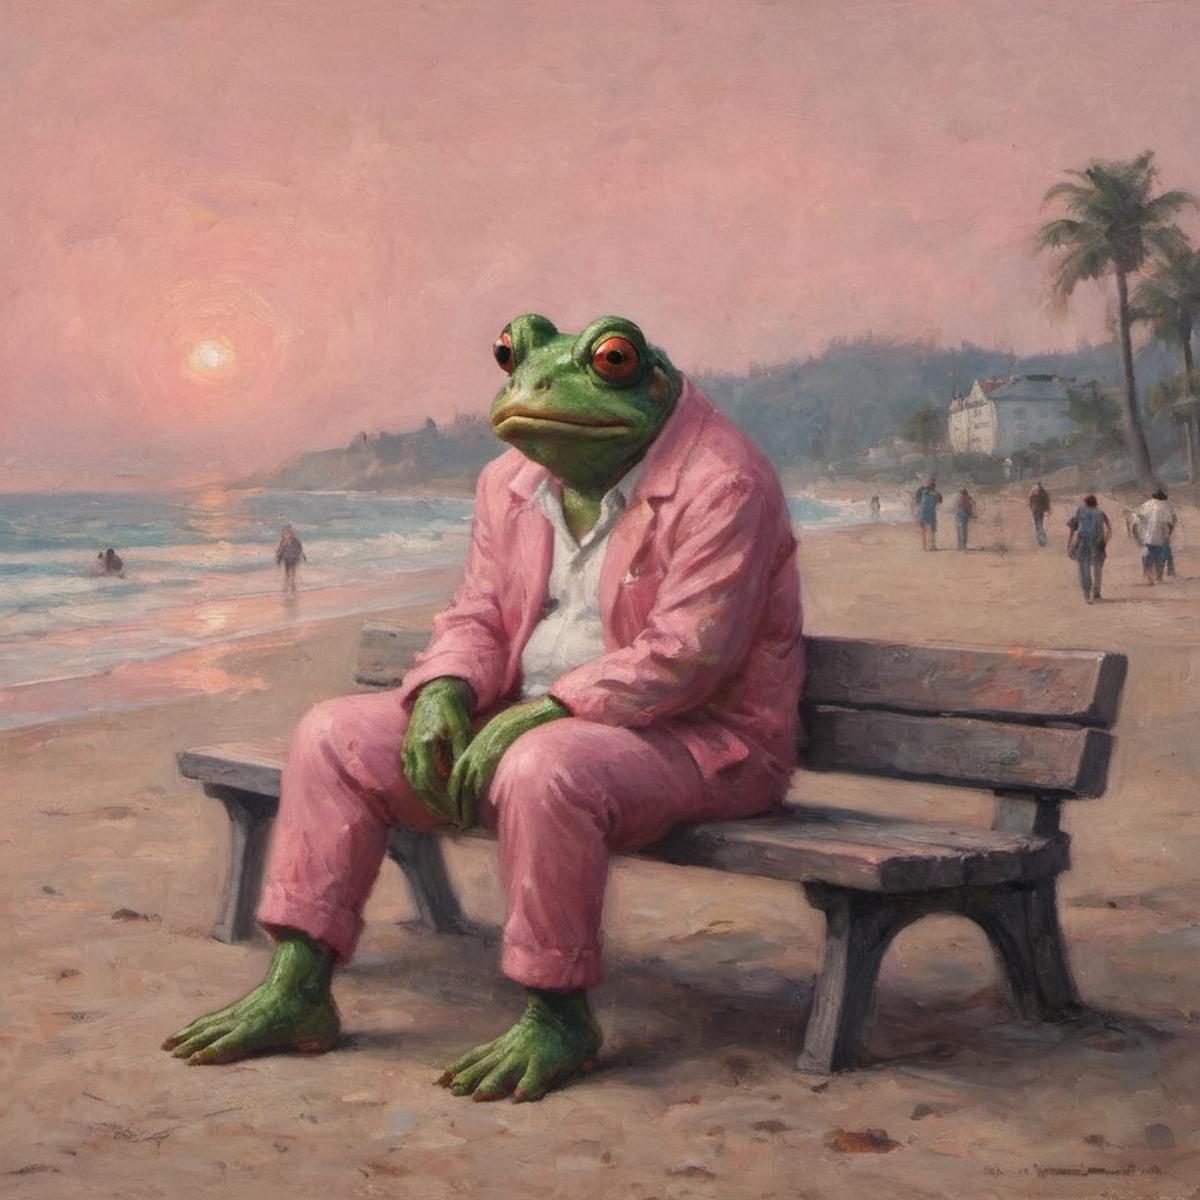 A painting of a frog in a pink suit sitting on a bench at the beach.